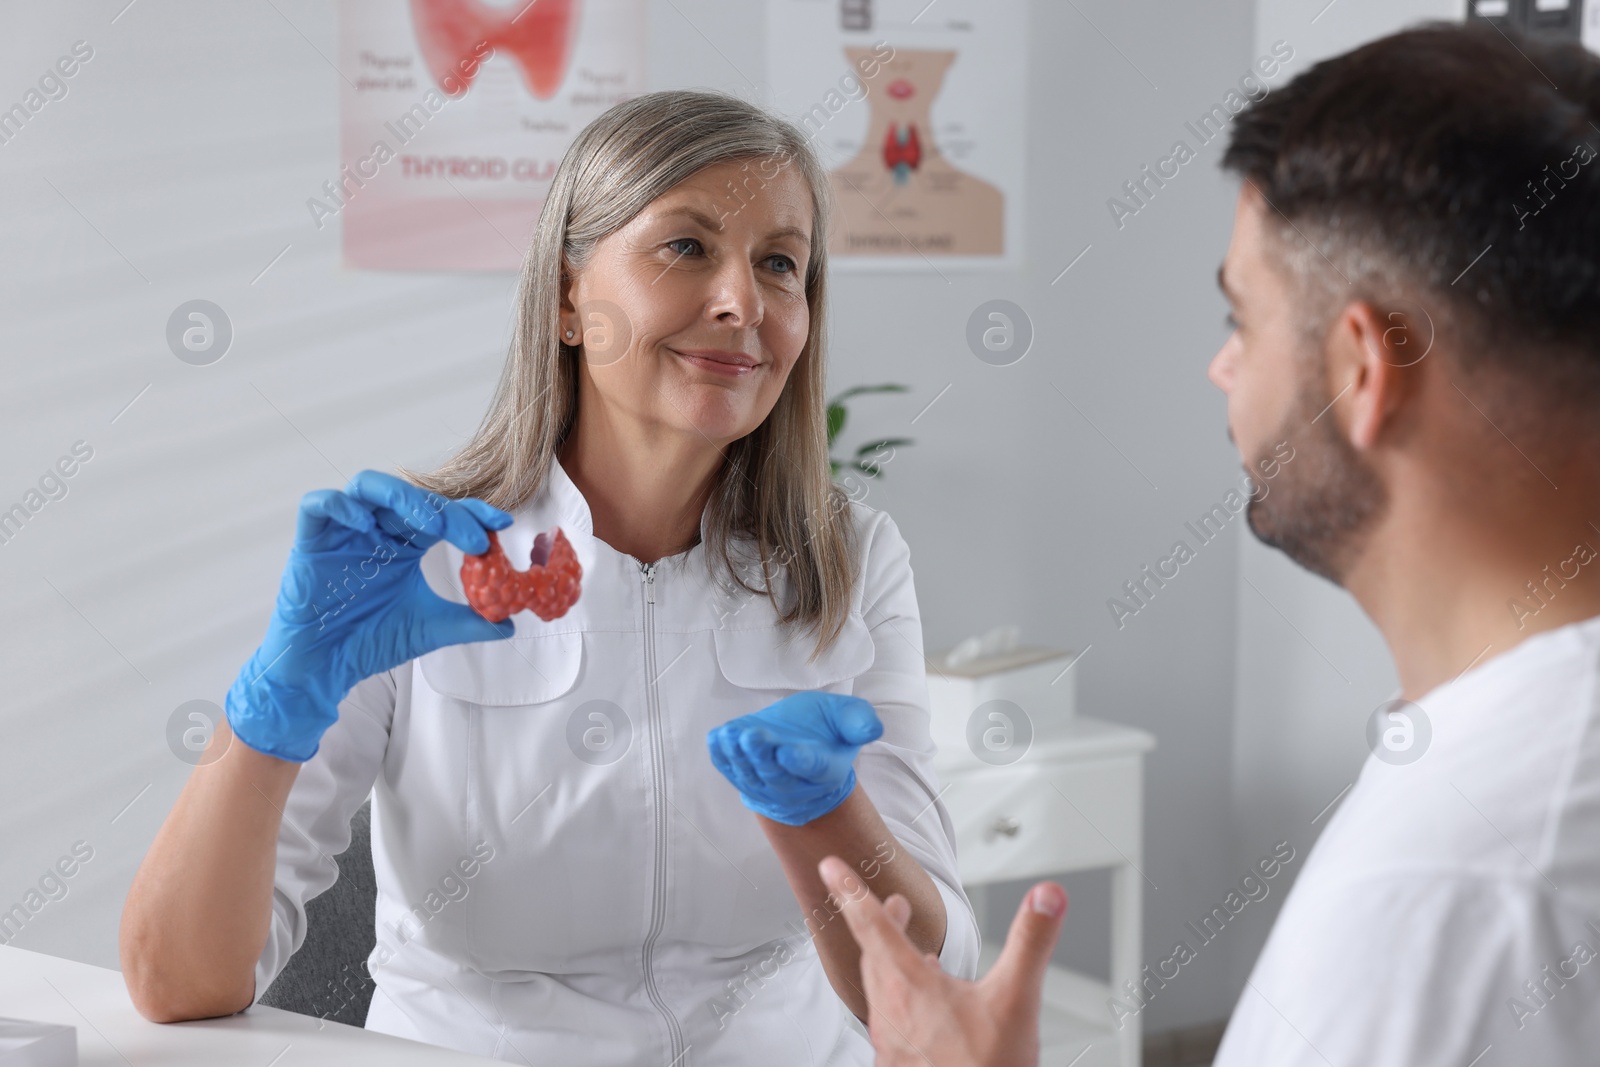 Photo of Endocrinologist showing thyroid gland model to patient at table in hospital